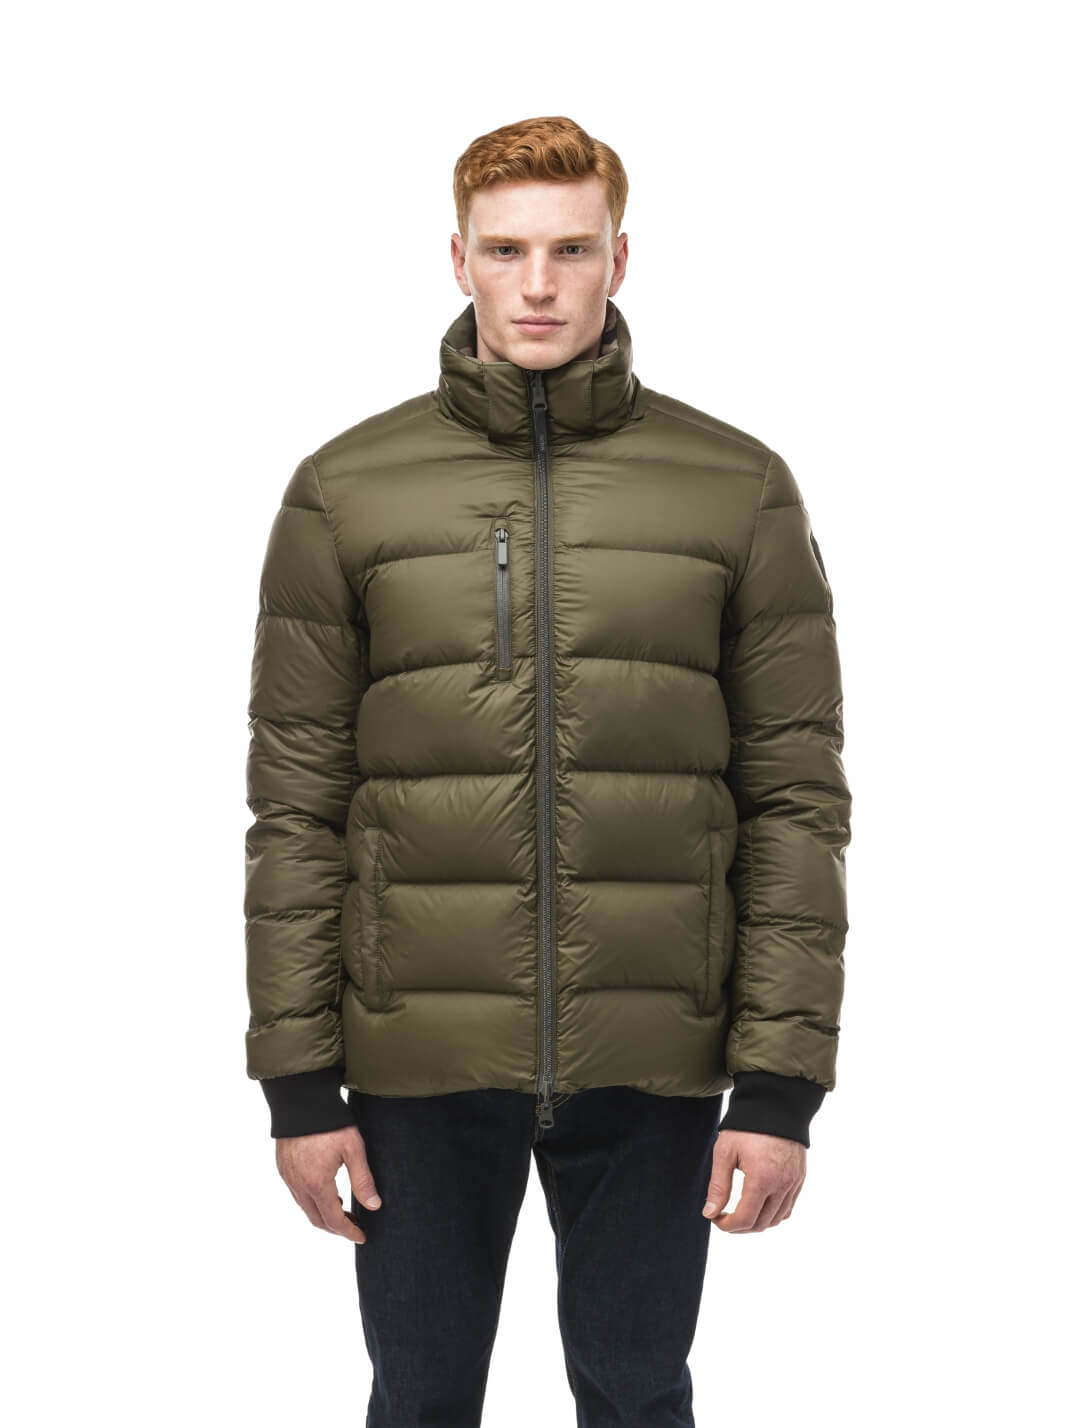 Oliver Men's Oversized Reversible Puffer from waterproof side to quilted puffer side, Canadian Duck Down insulation, in hip length, removable down-filled hood, multiple zipper pockets, 2-way center-front zipper, ribbed cuffs, in Camo